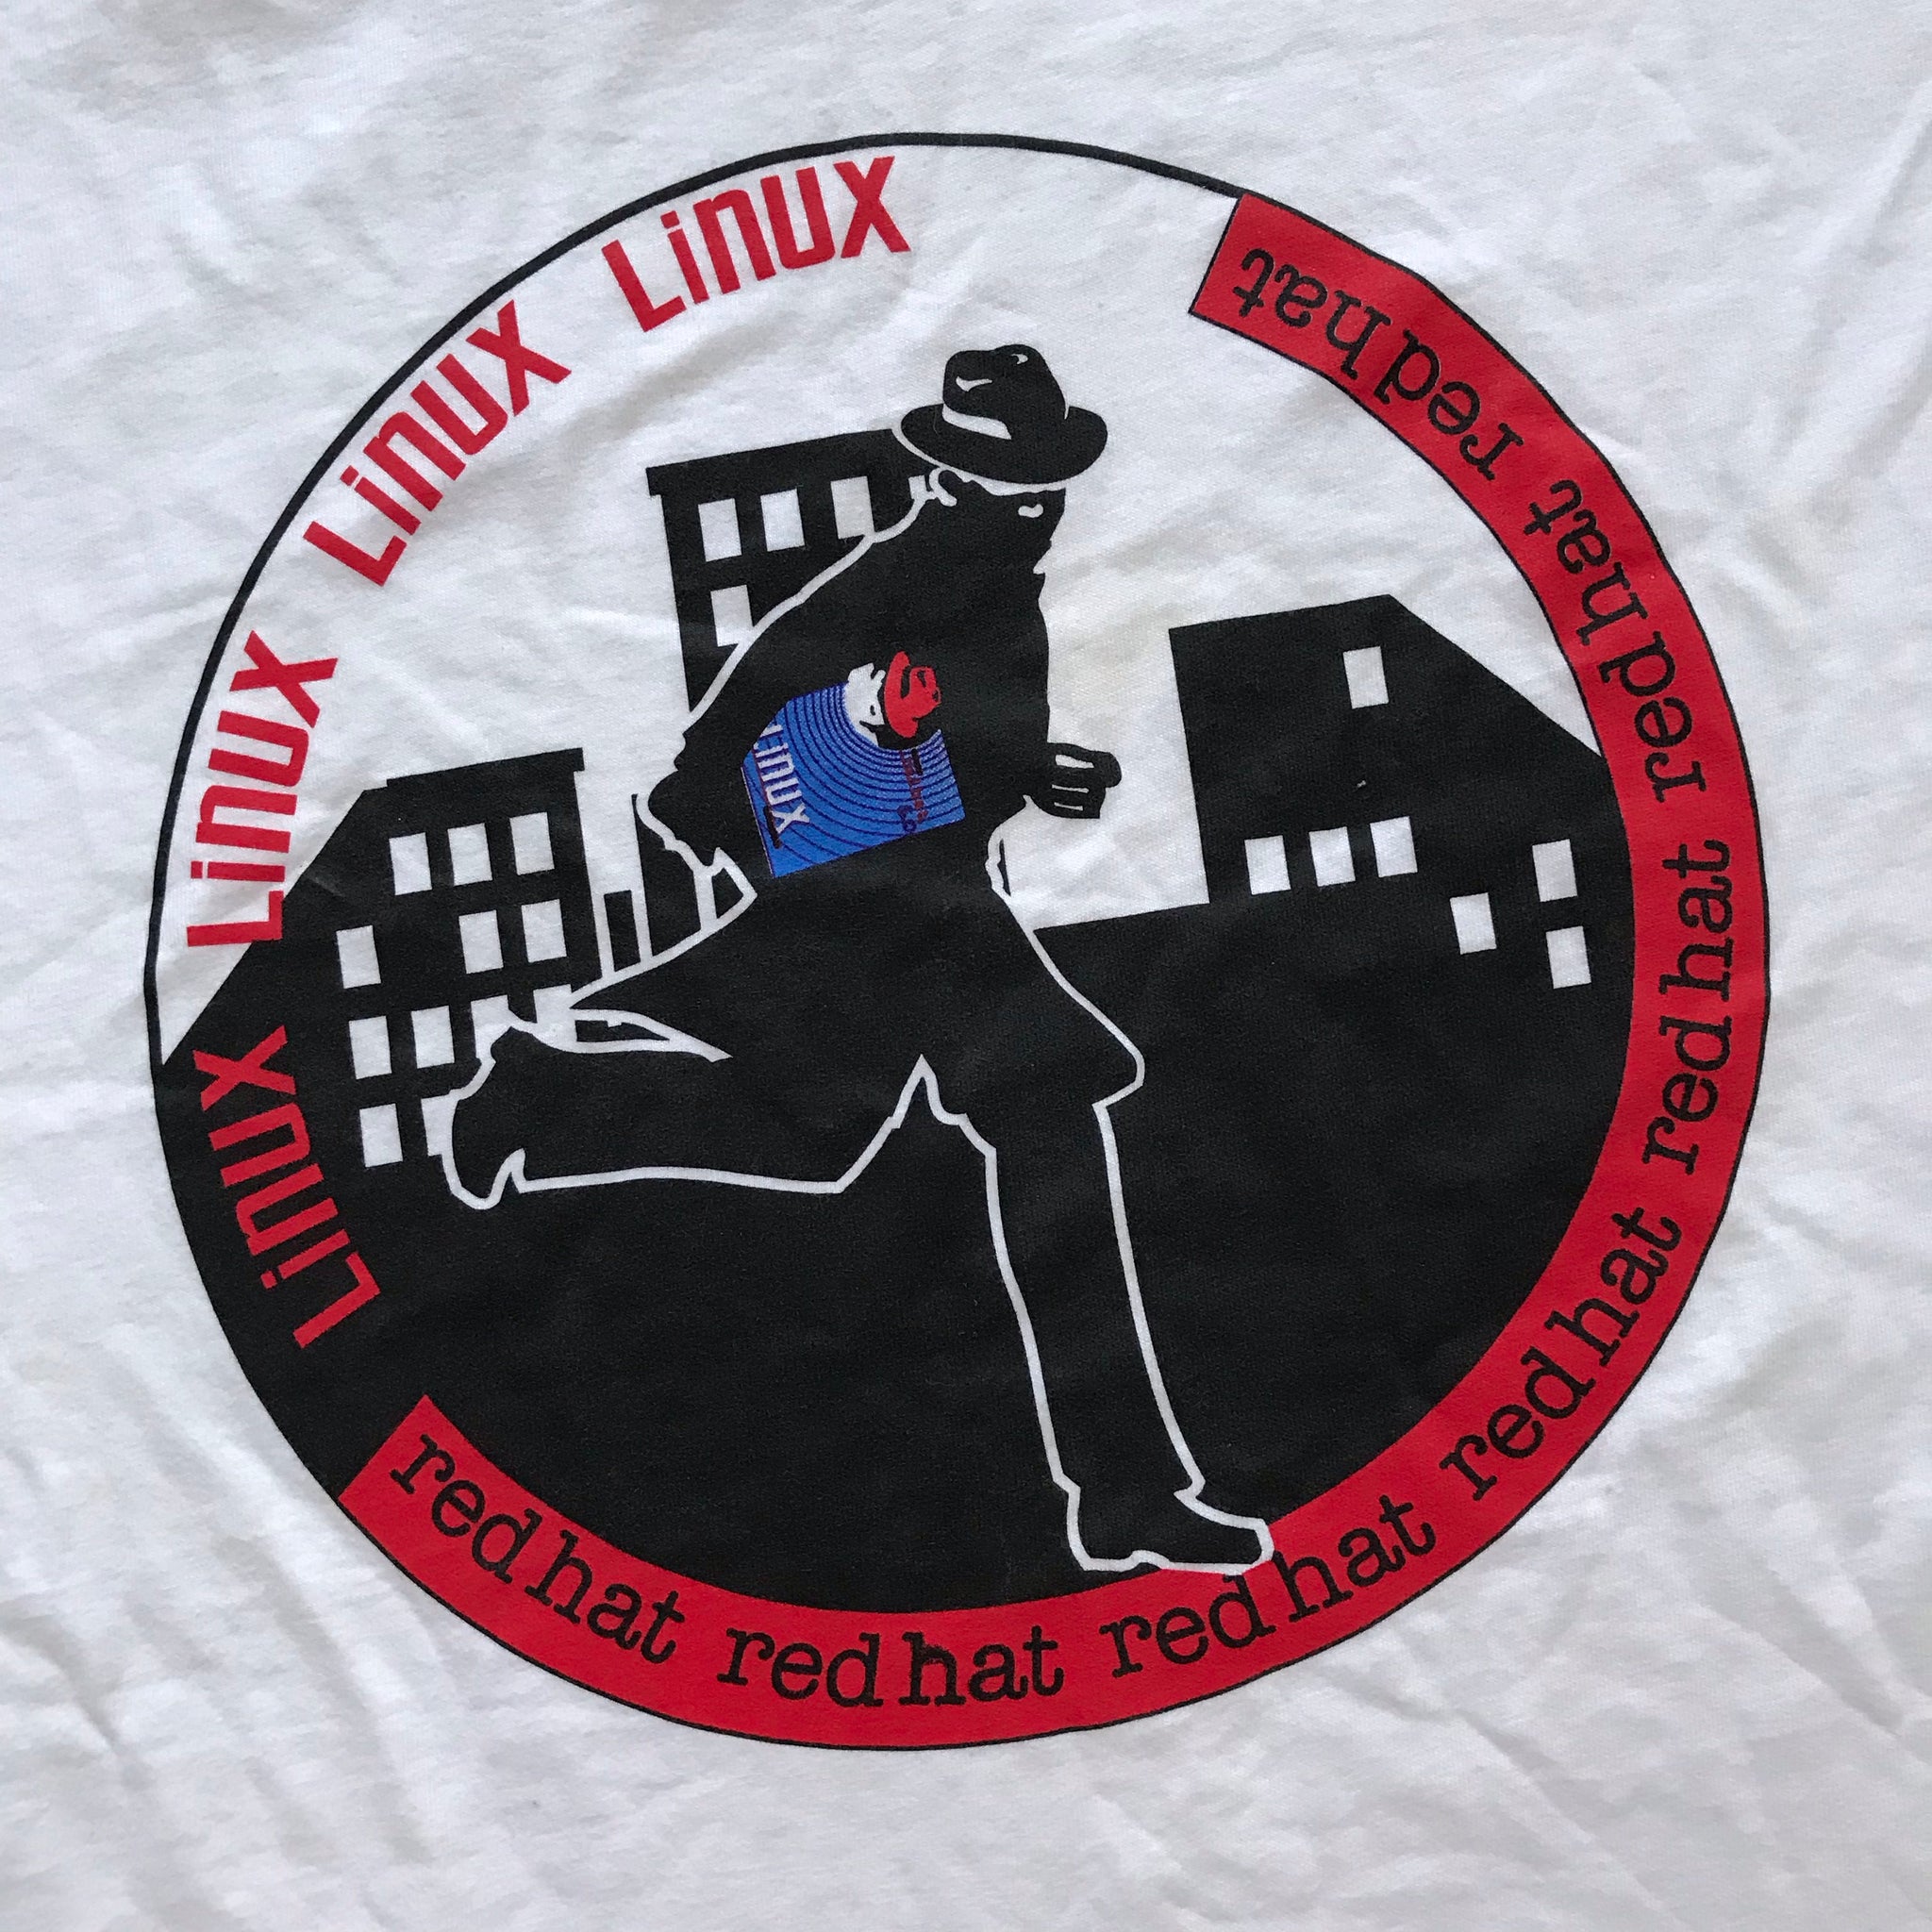 90s Linux red hat tee XL